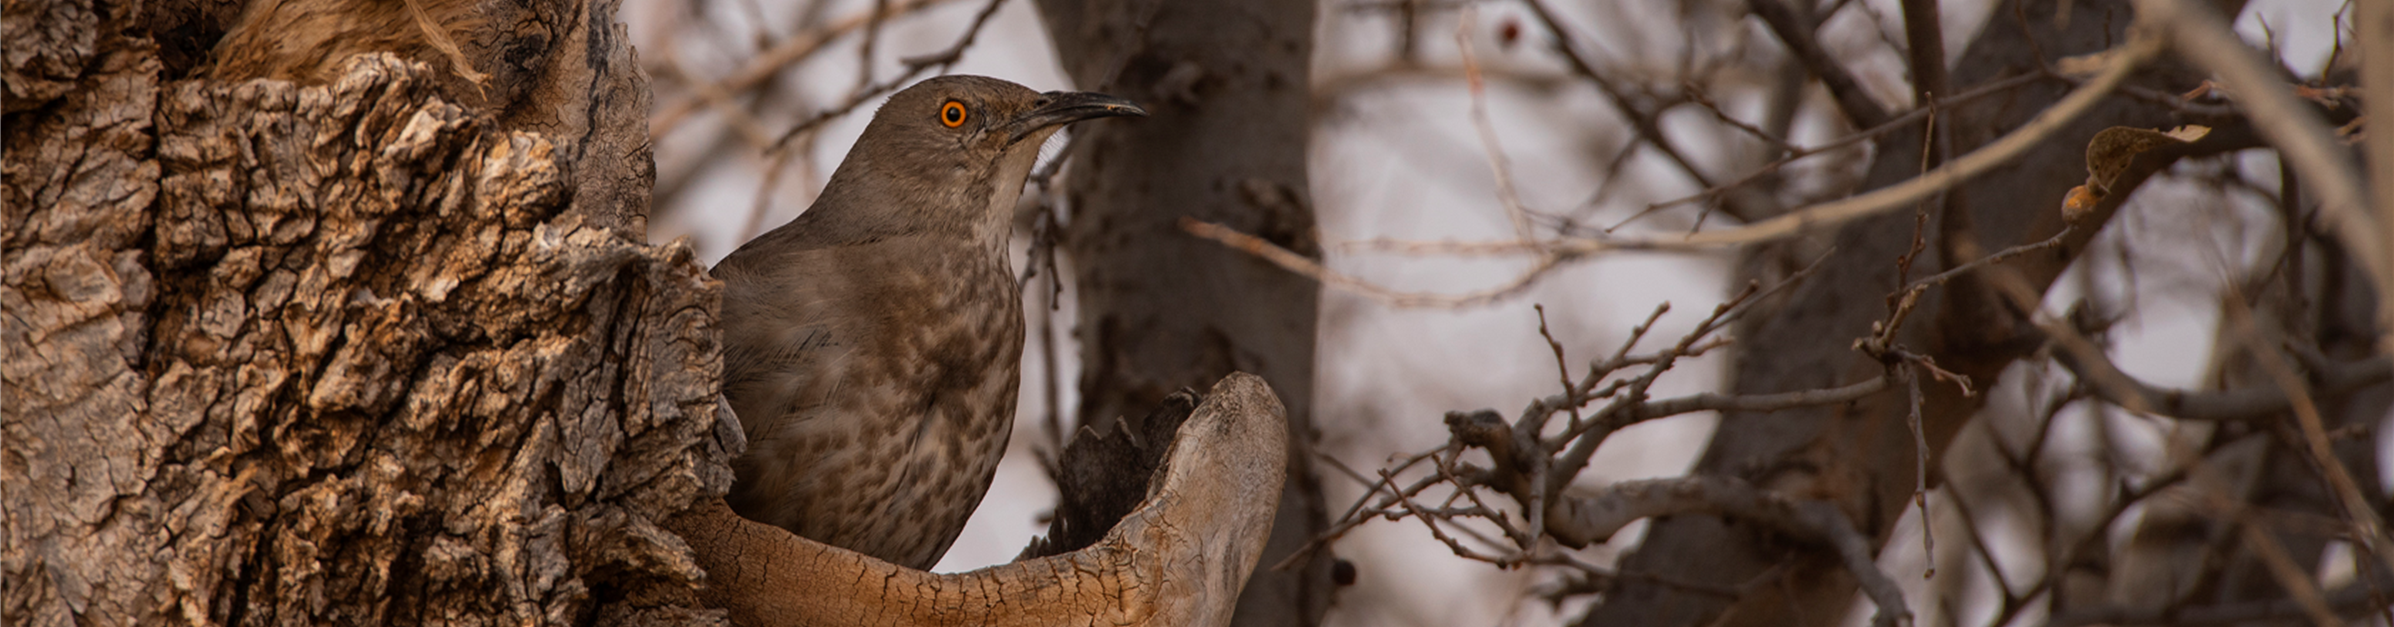 A Curve-billed Thrasher, a brownish-gray bird with a long tail, long, curved bill, and orange eye perches against a tree trunk.